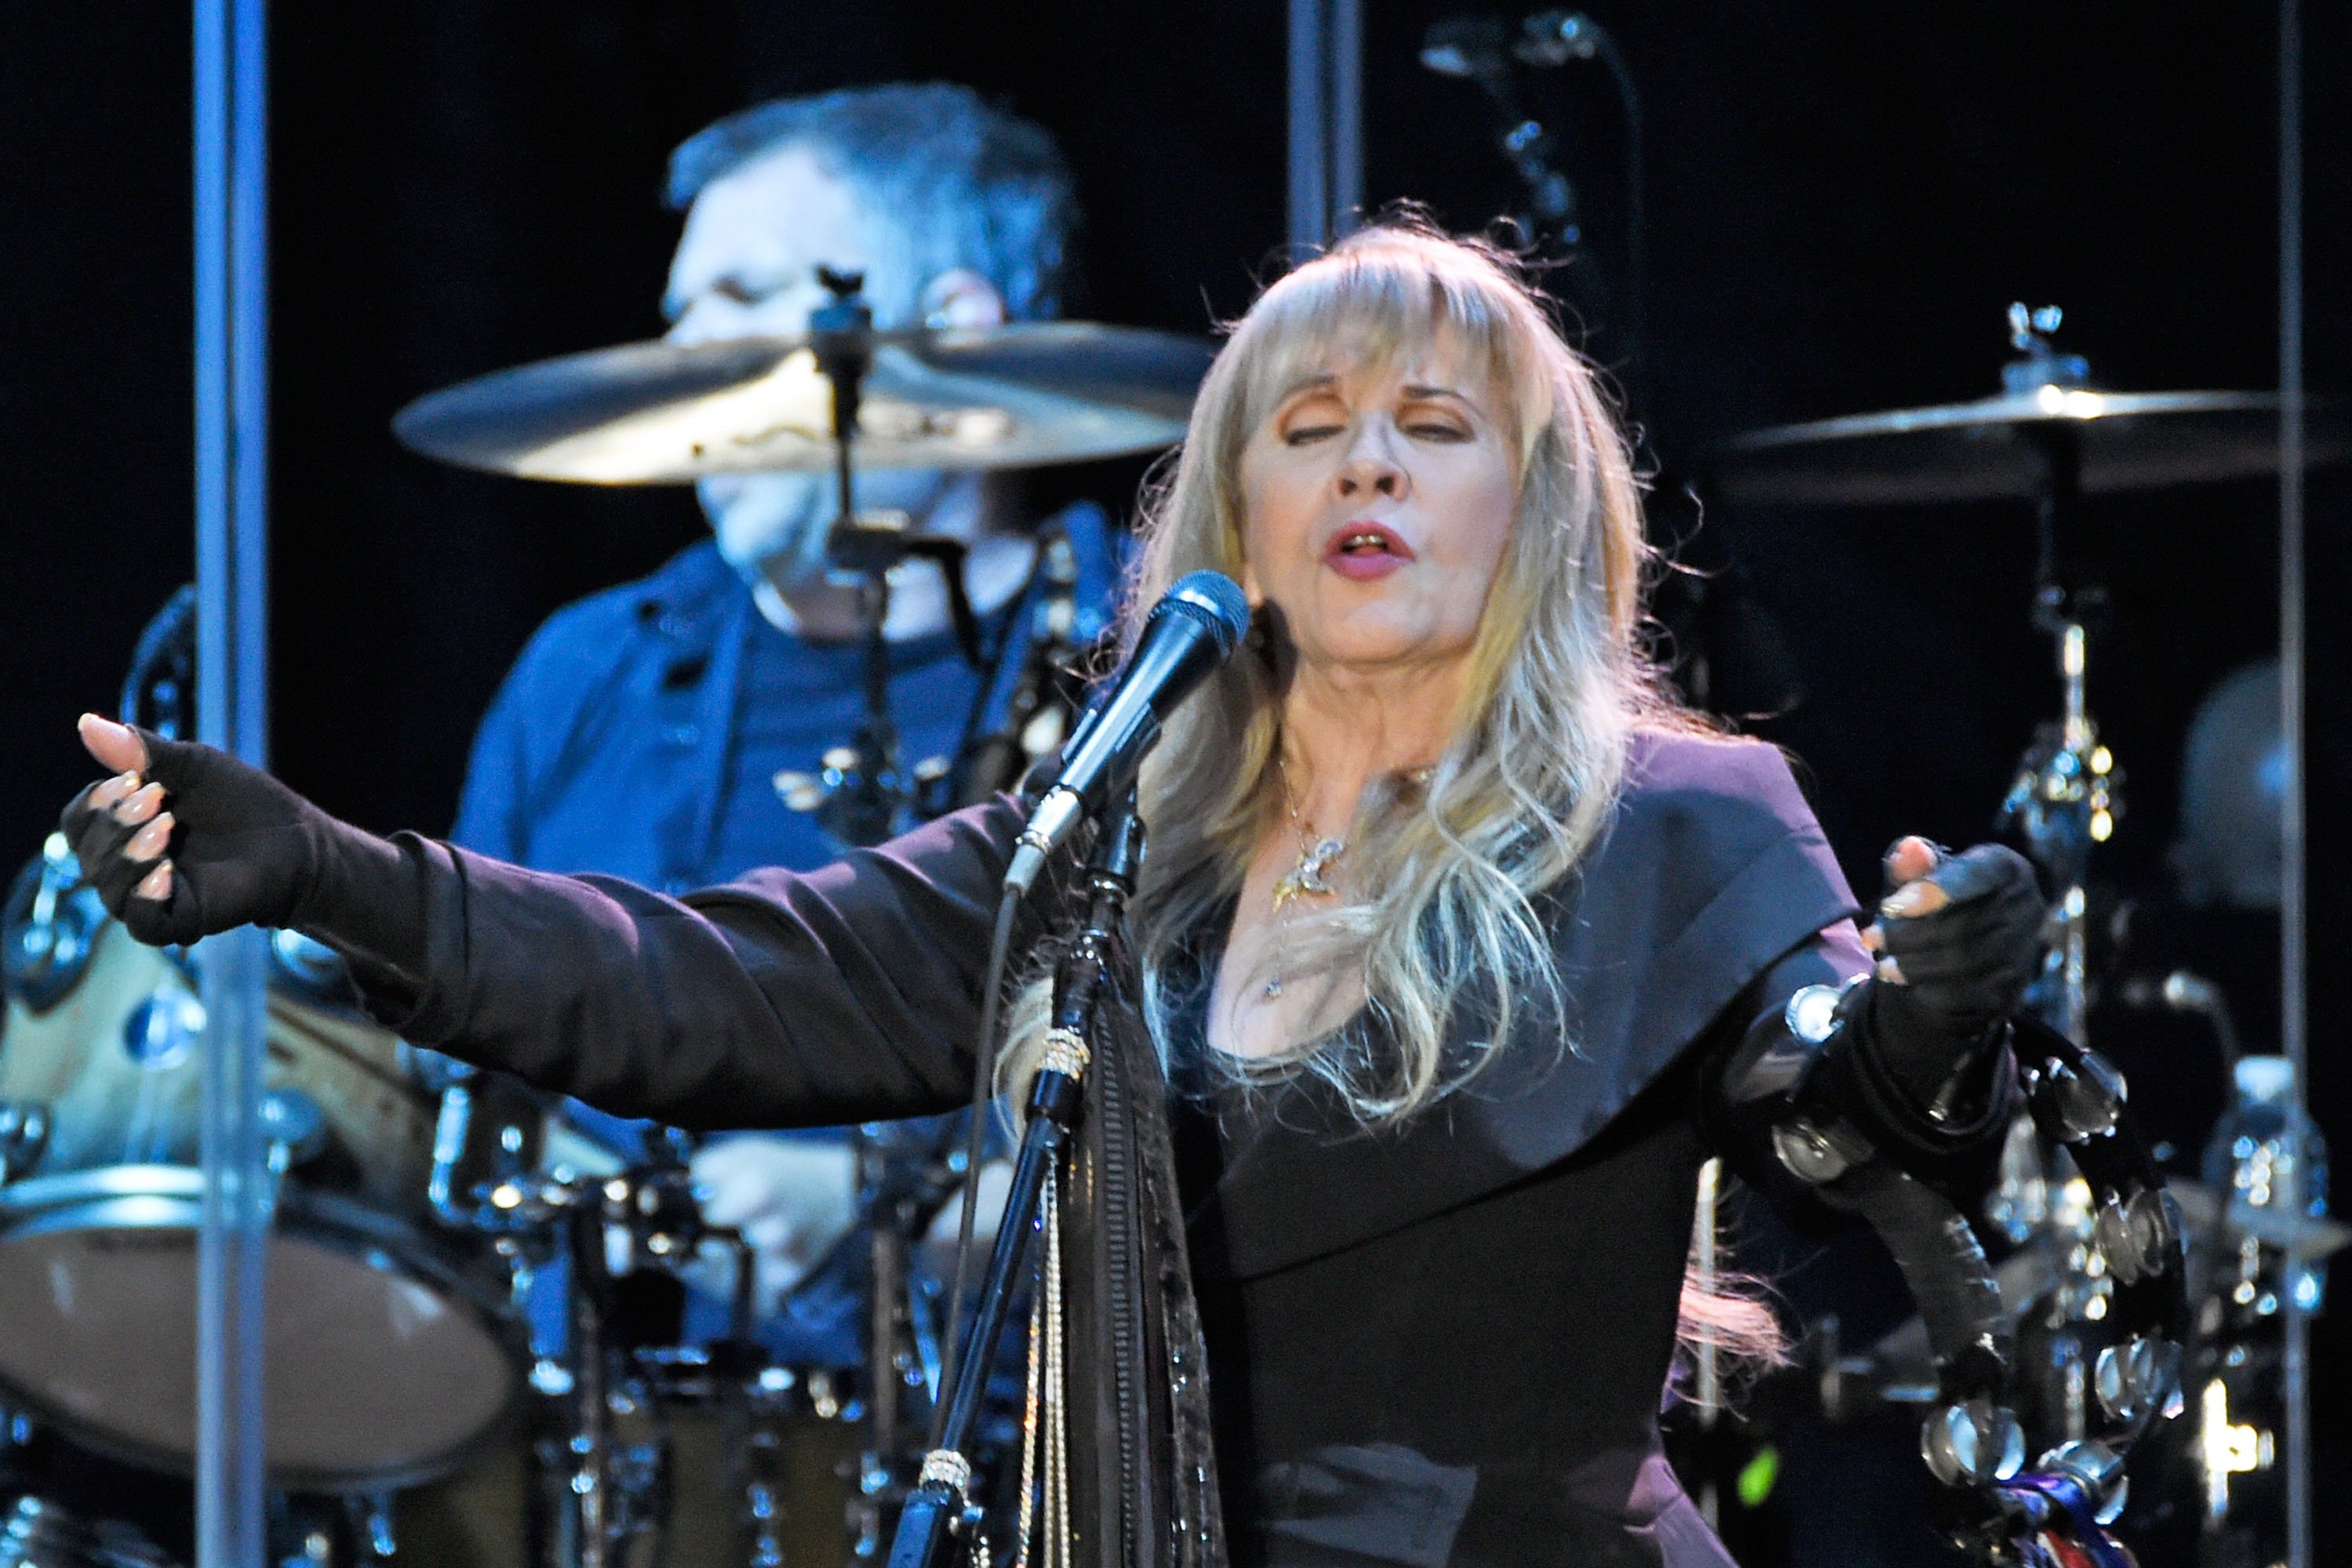 Stevie Nicks wears a black outfit while performing.